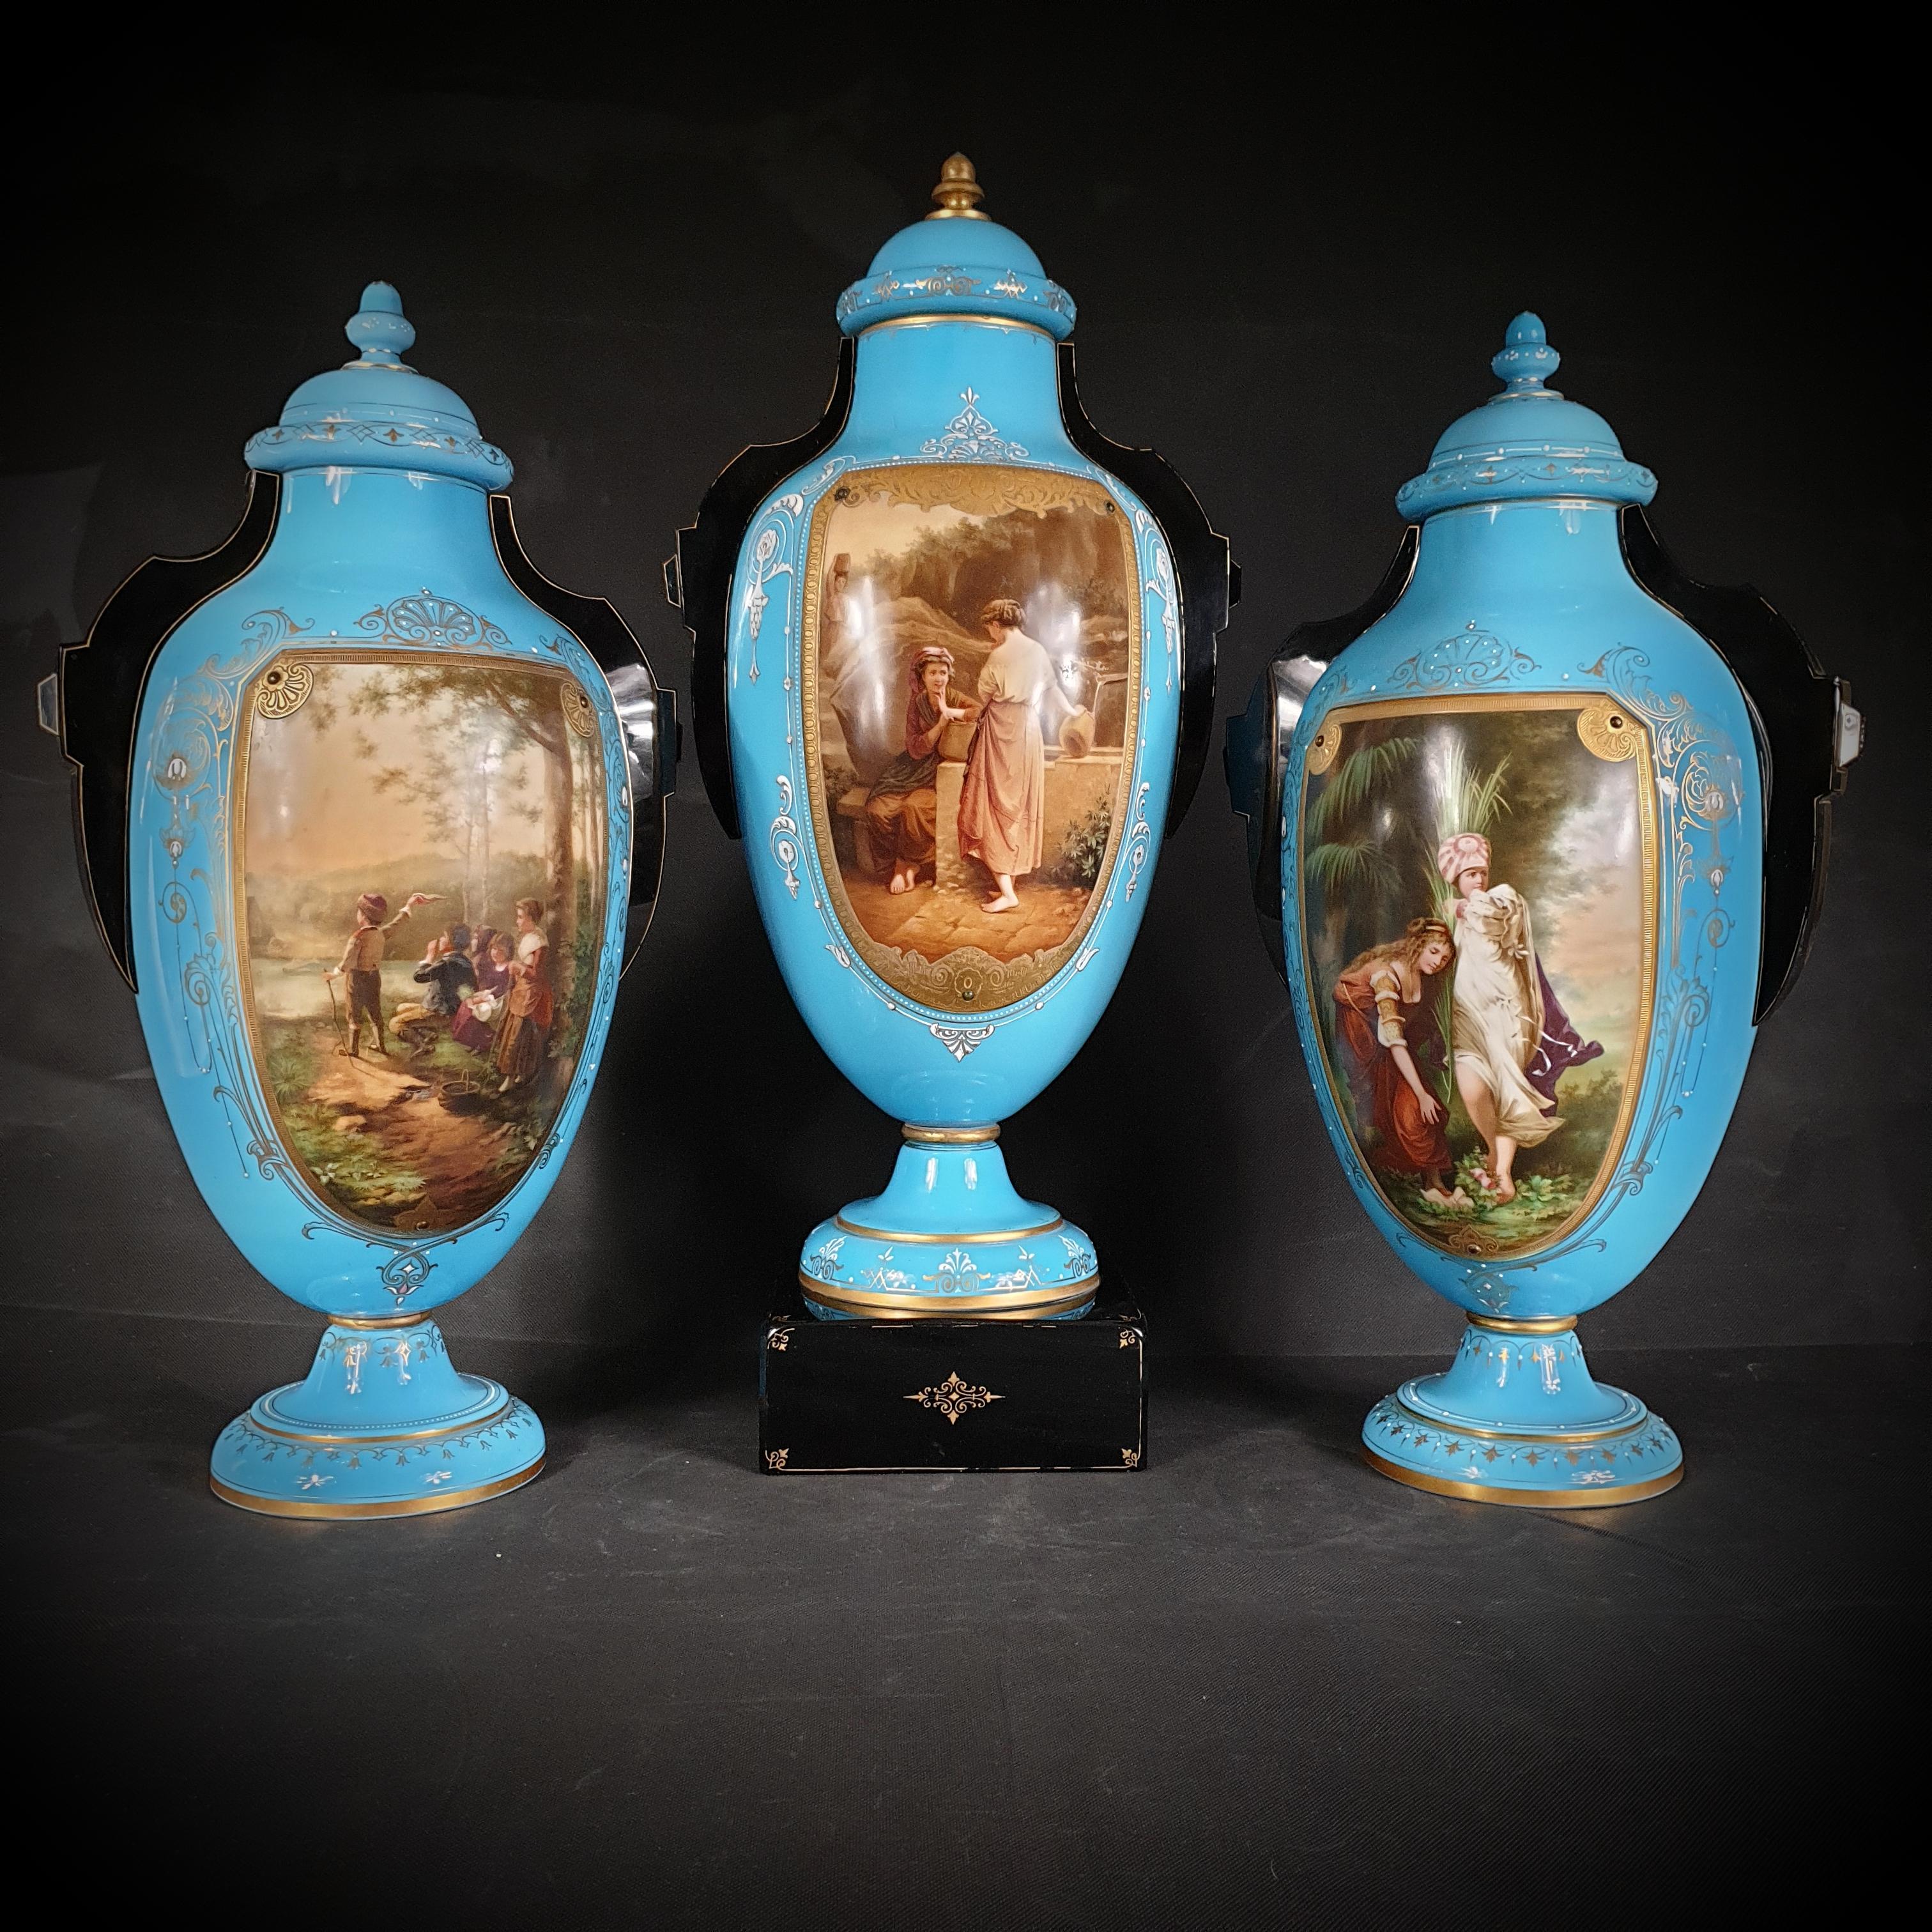 A spectacular collection of three painted and gilded blue opaline glass urns was created in Germany between 1845 and 1855. 
These stunning pieces have exceptional oval-shaped designs that are both elegant and captivating.
These exquisite urns are